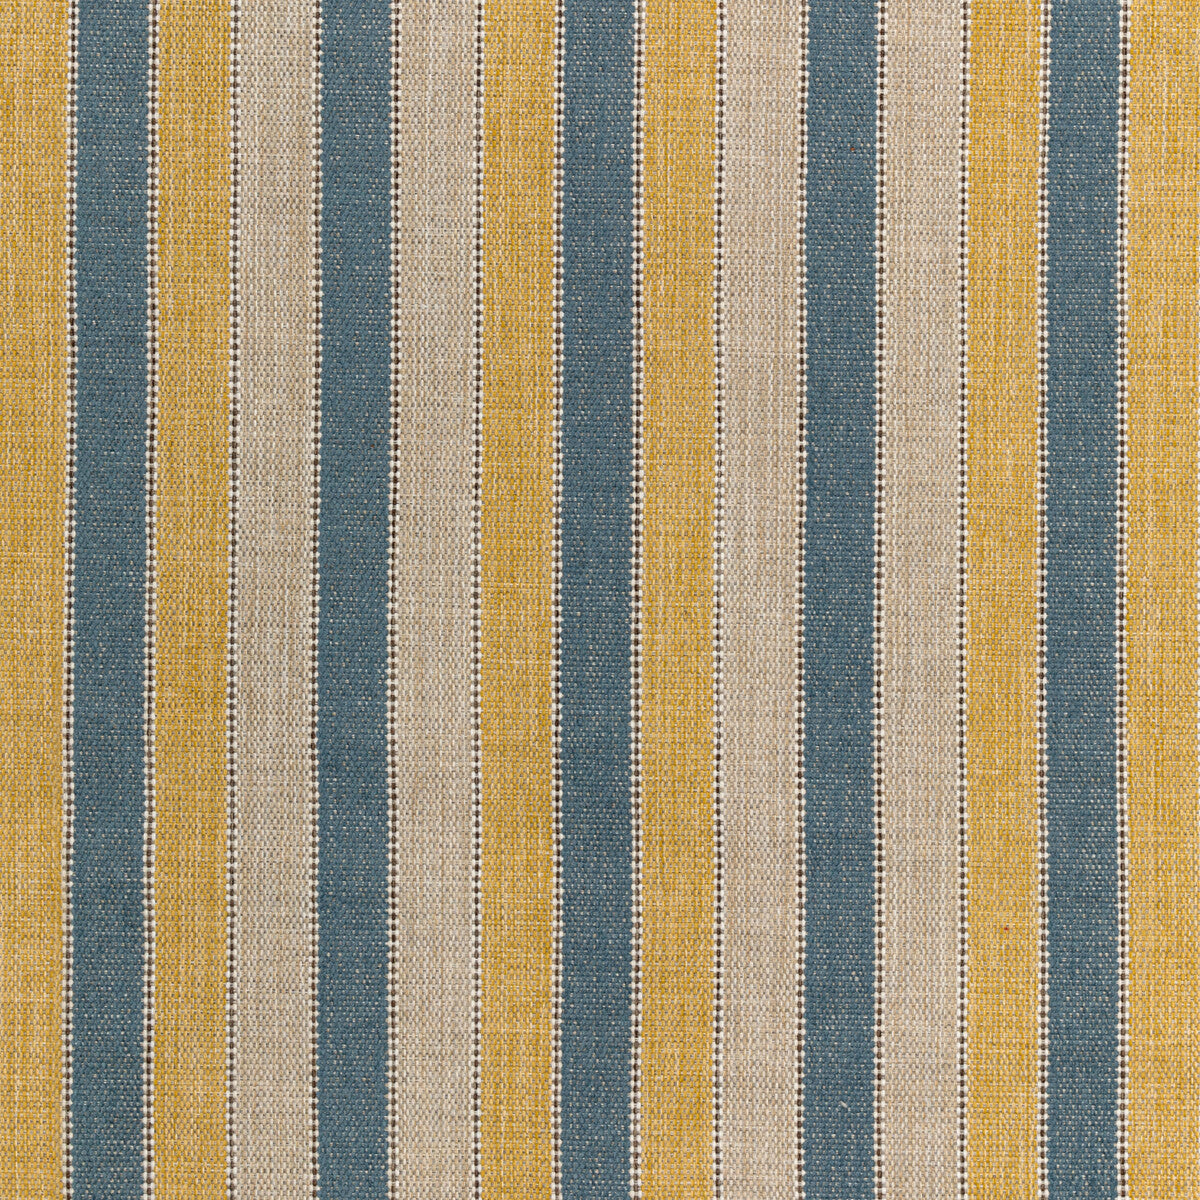 Walkway fabric in fountain color - pattern 36278.54.0 - by Kravet Contract in the Gis Crypton collection